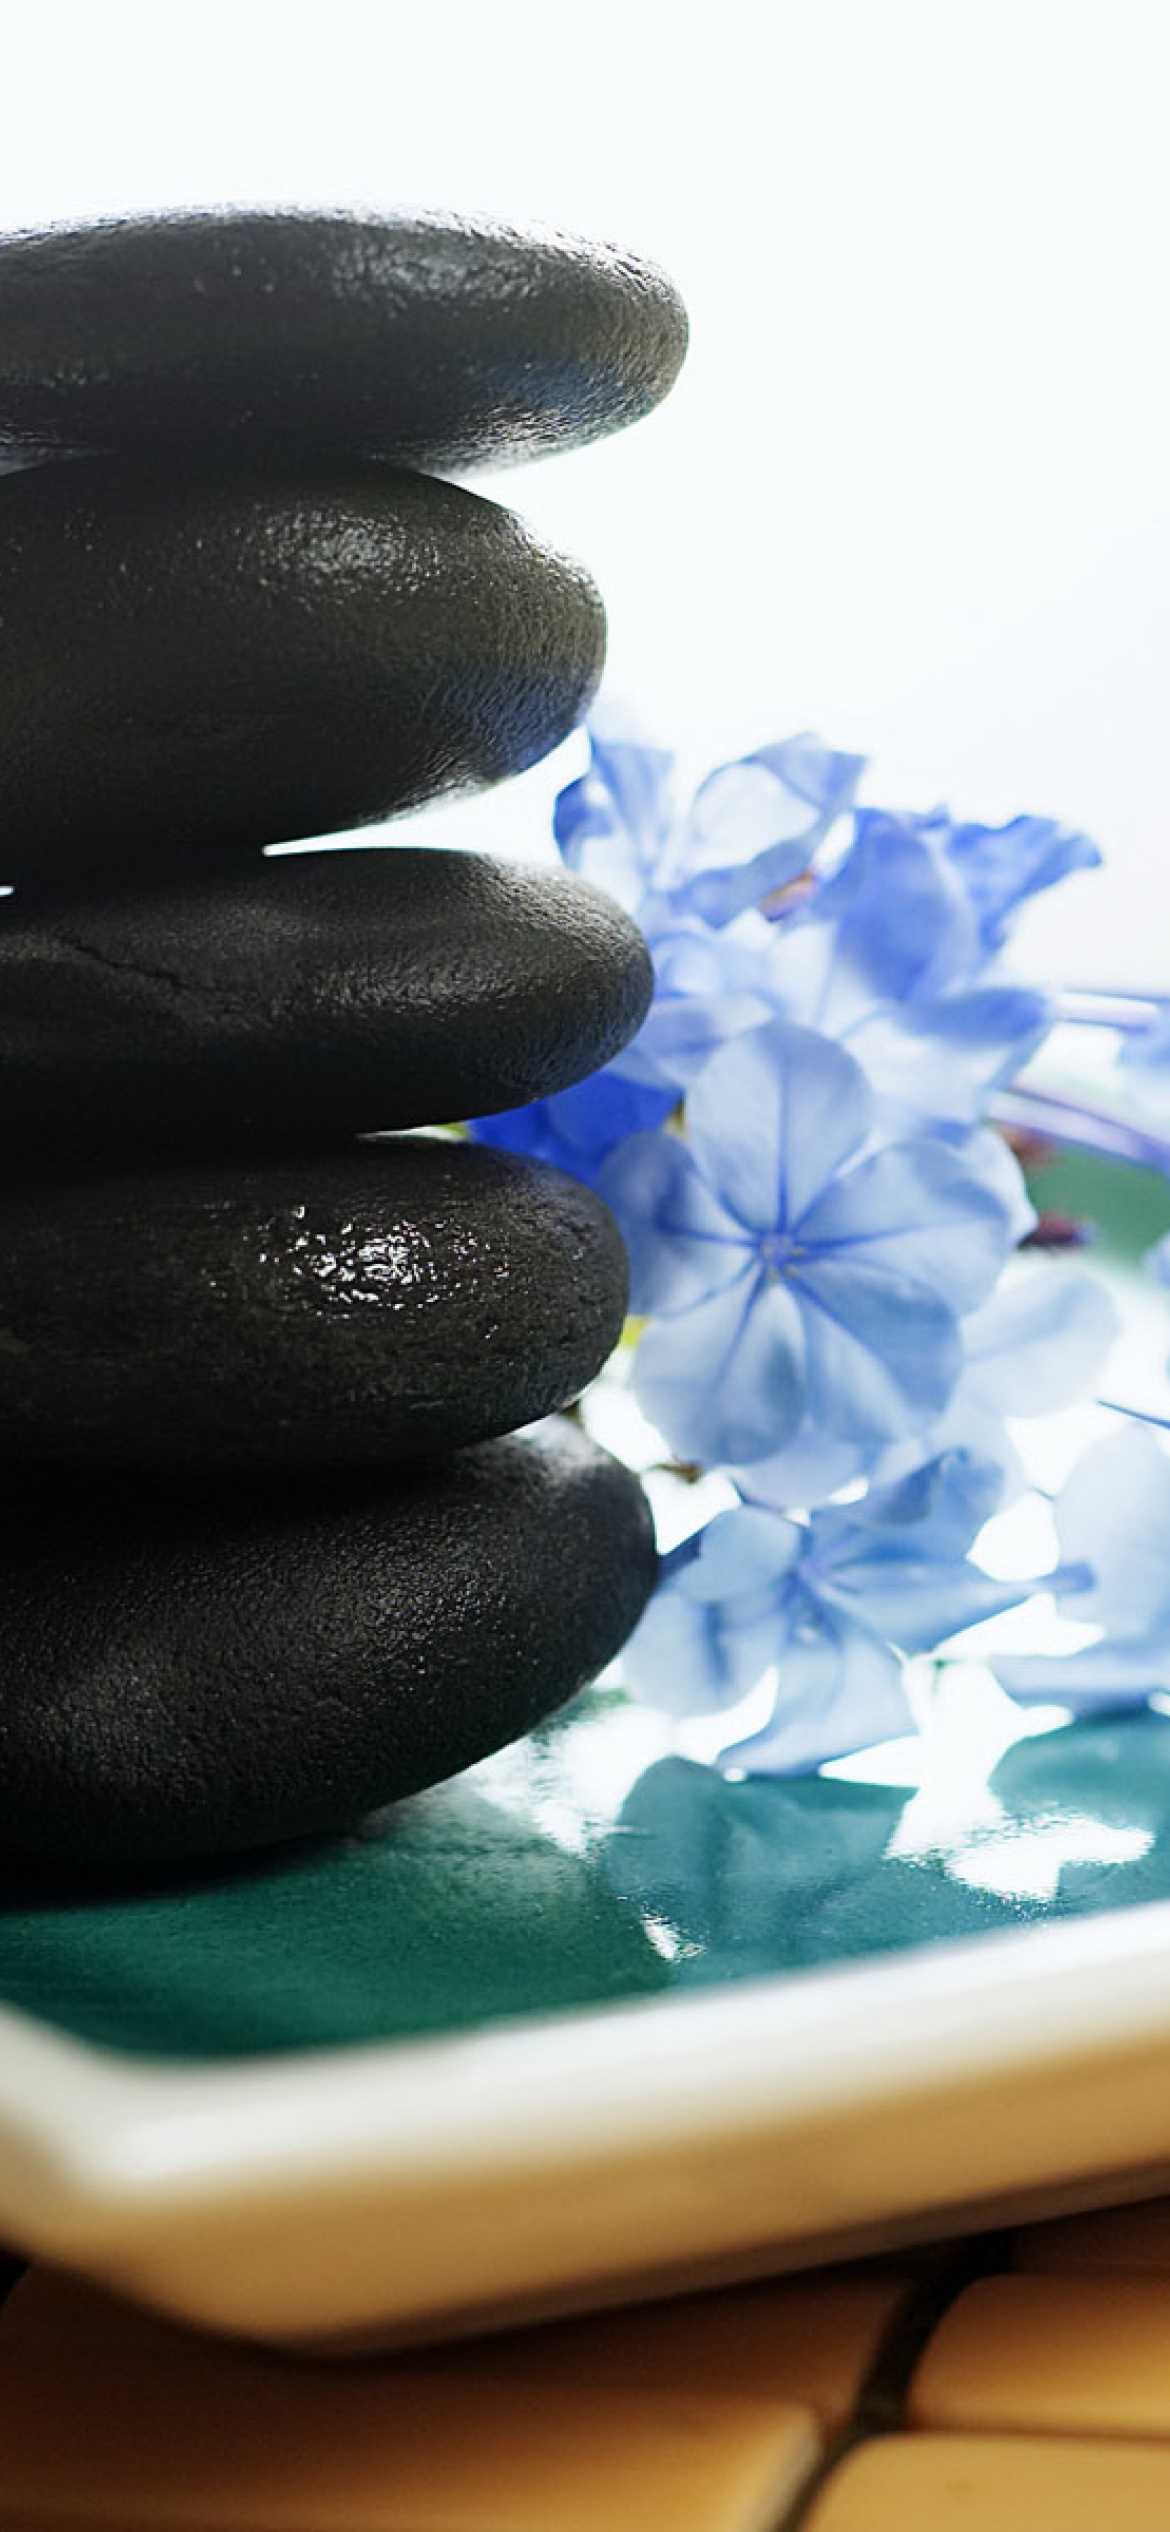 Spa Elements for Massage wallpaper 1170x2532